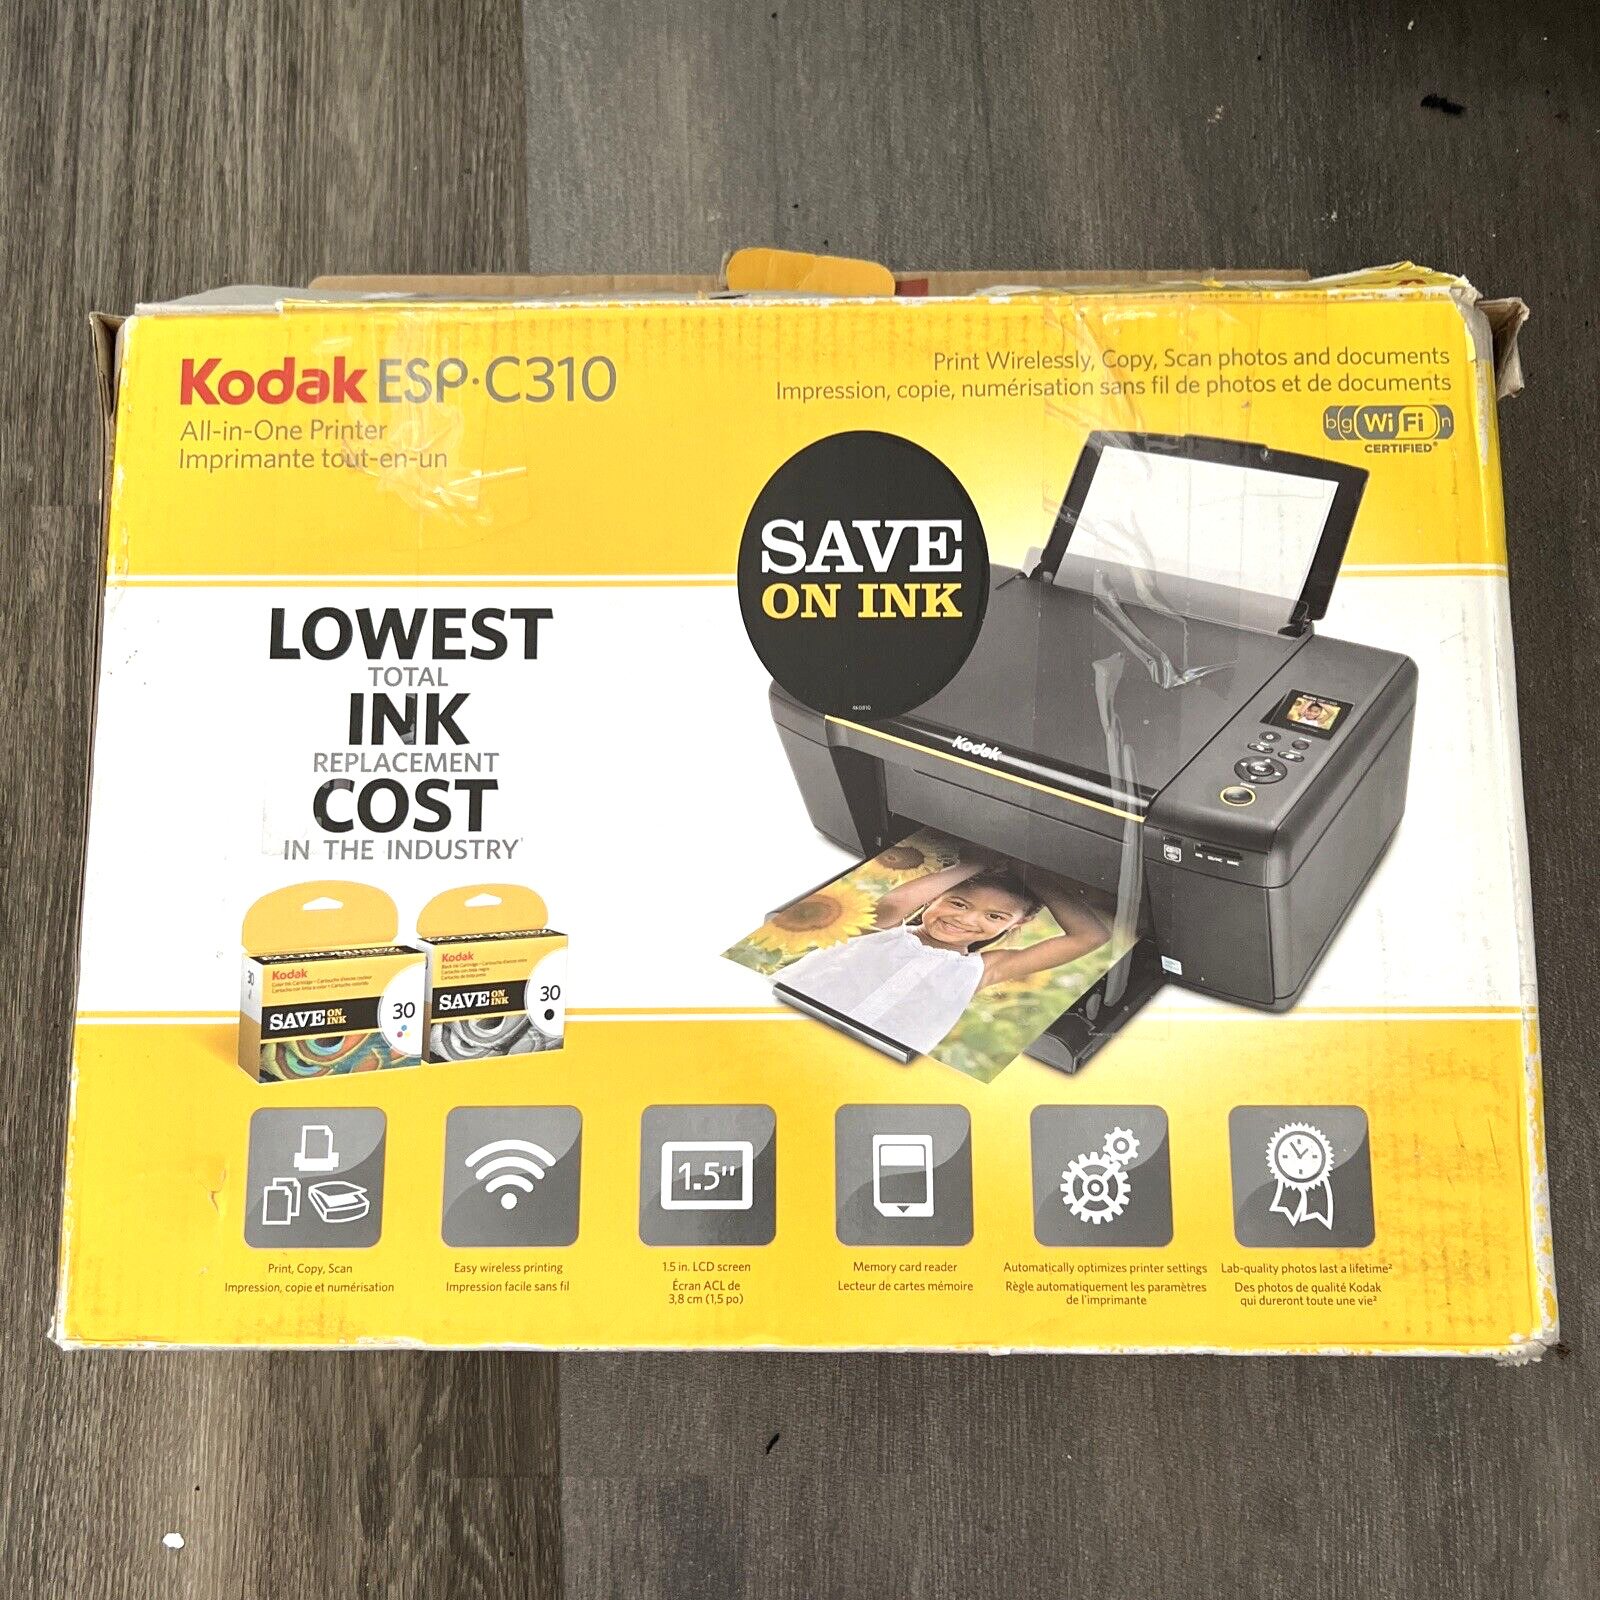 Kodak ESP C310 All-In-One Inkjet Printer Copy, Scan Tested Working with Manual